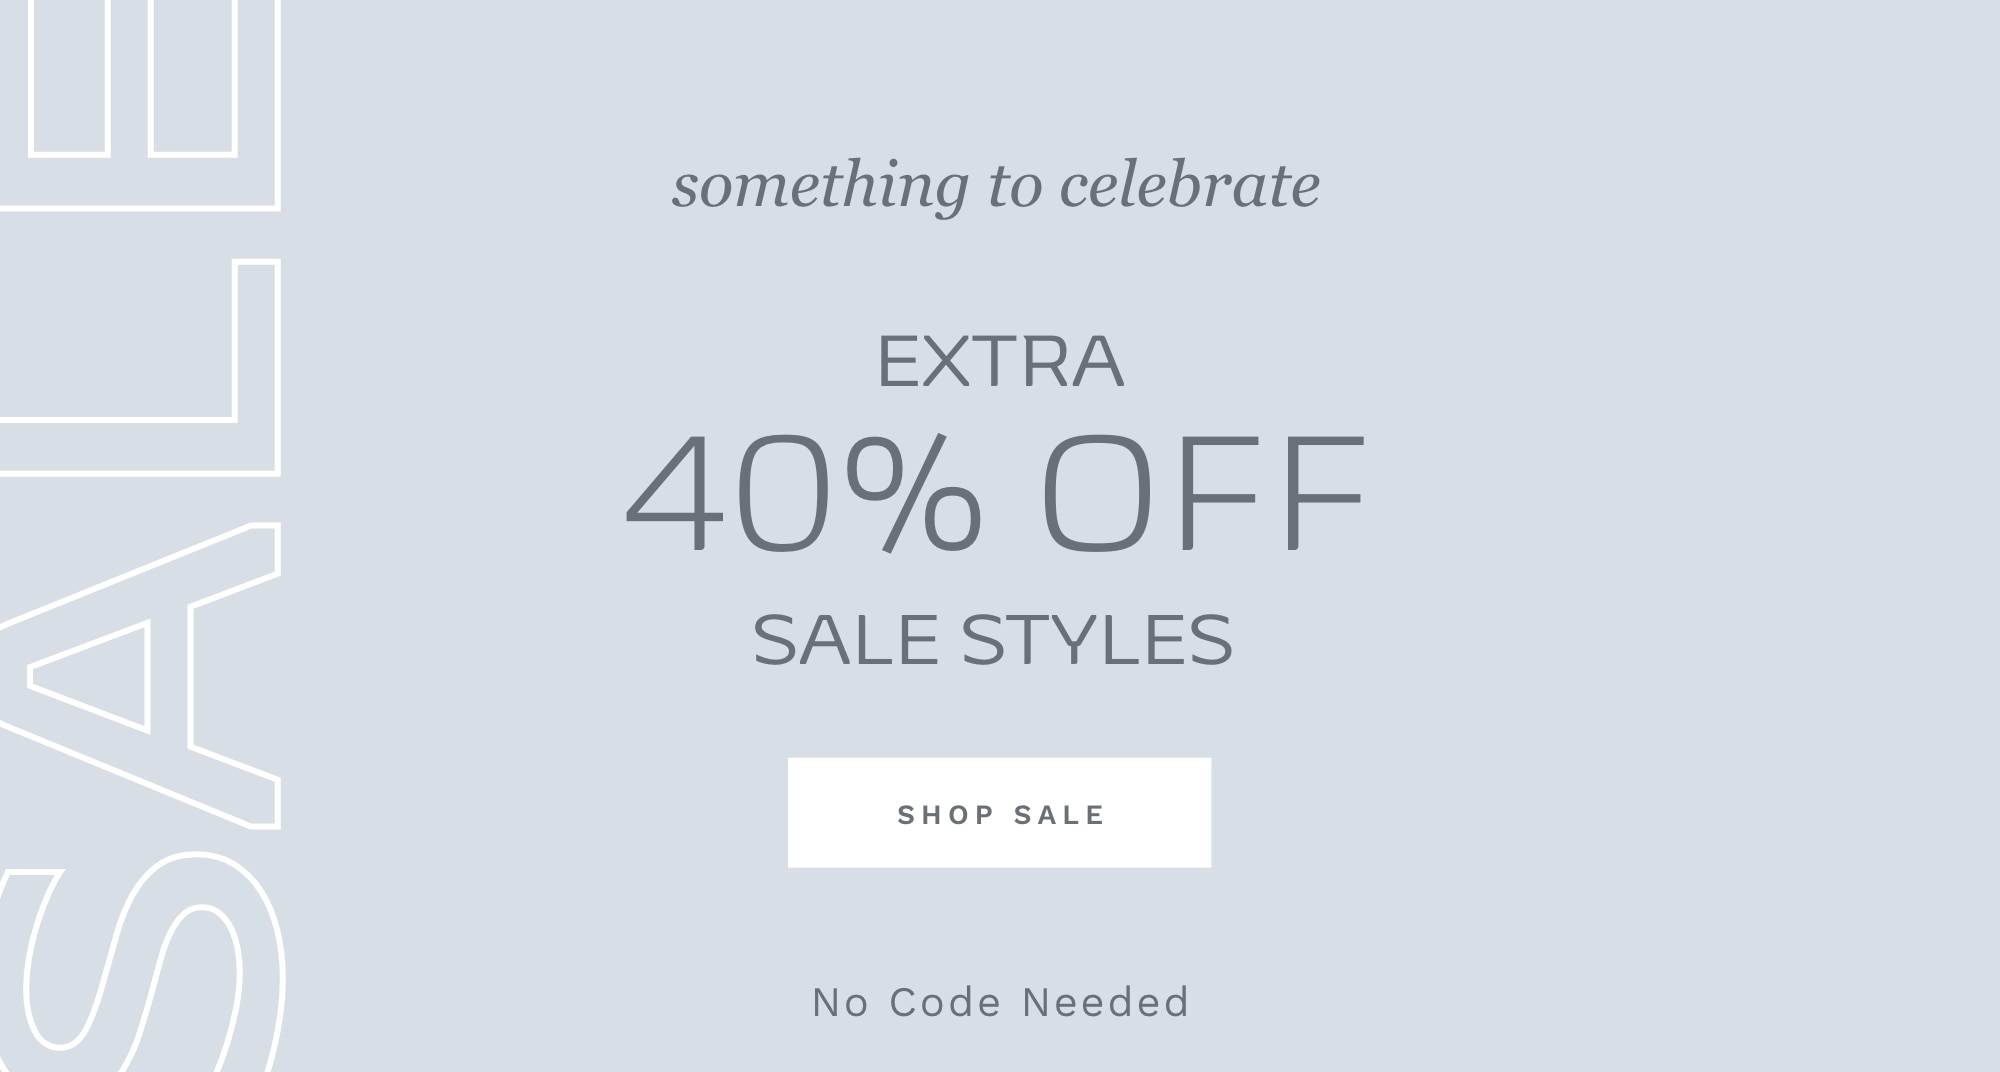 something to celebrate EXTRA 40% OFF SALE STYLES SHOP SALE No Code Needed